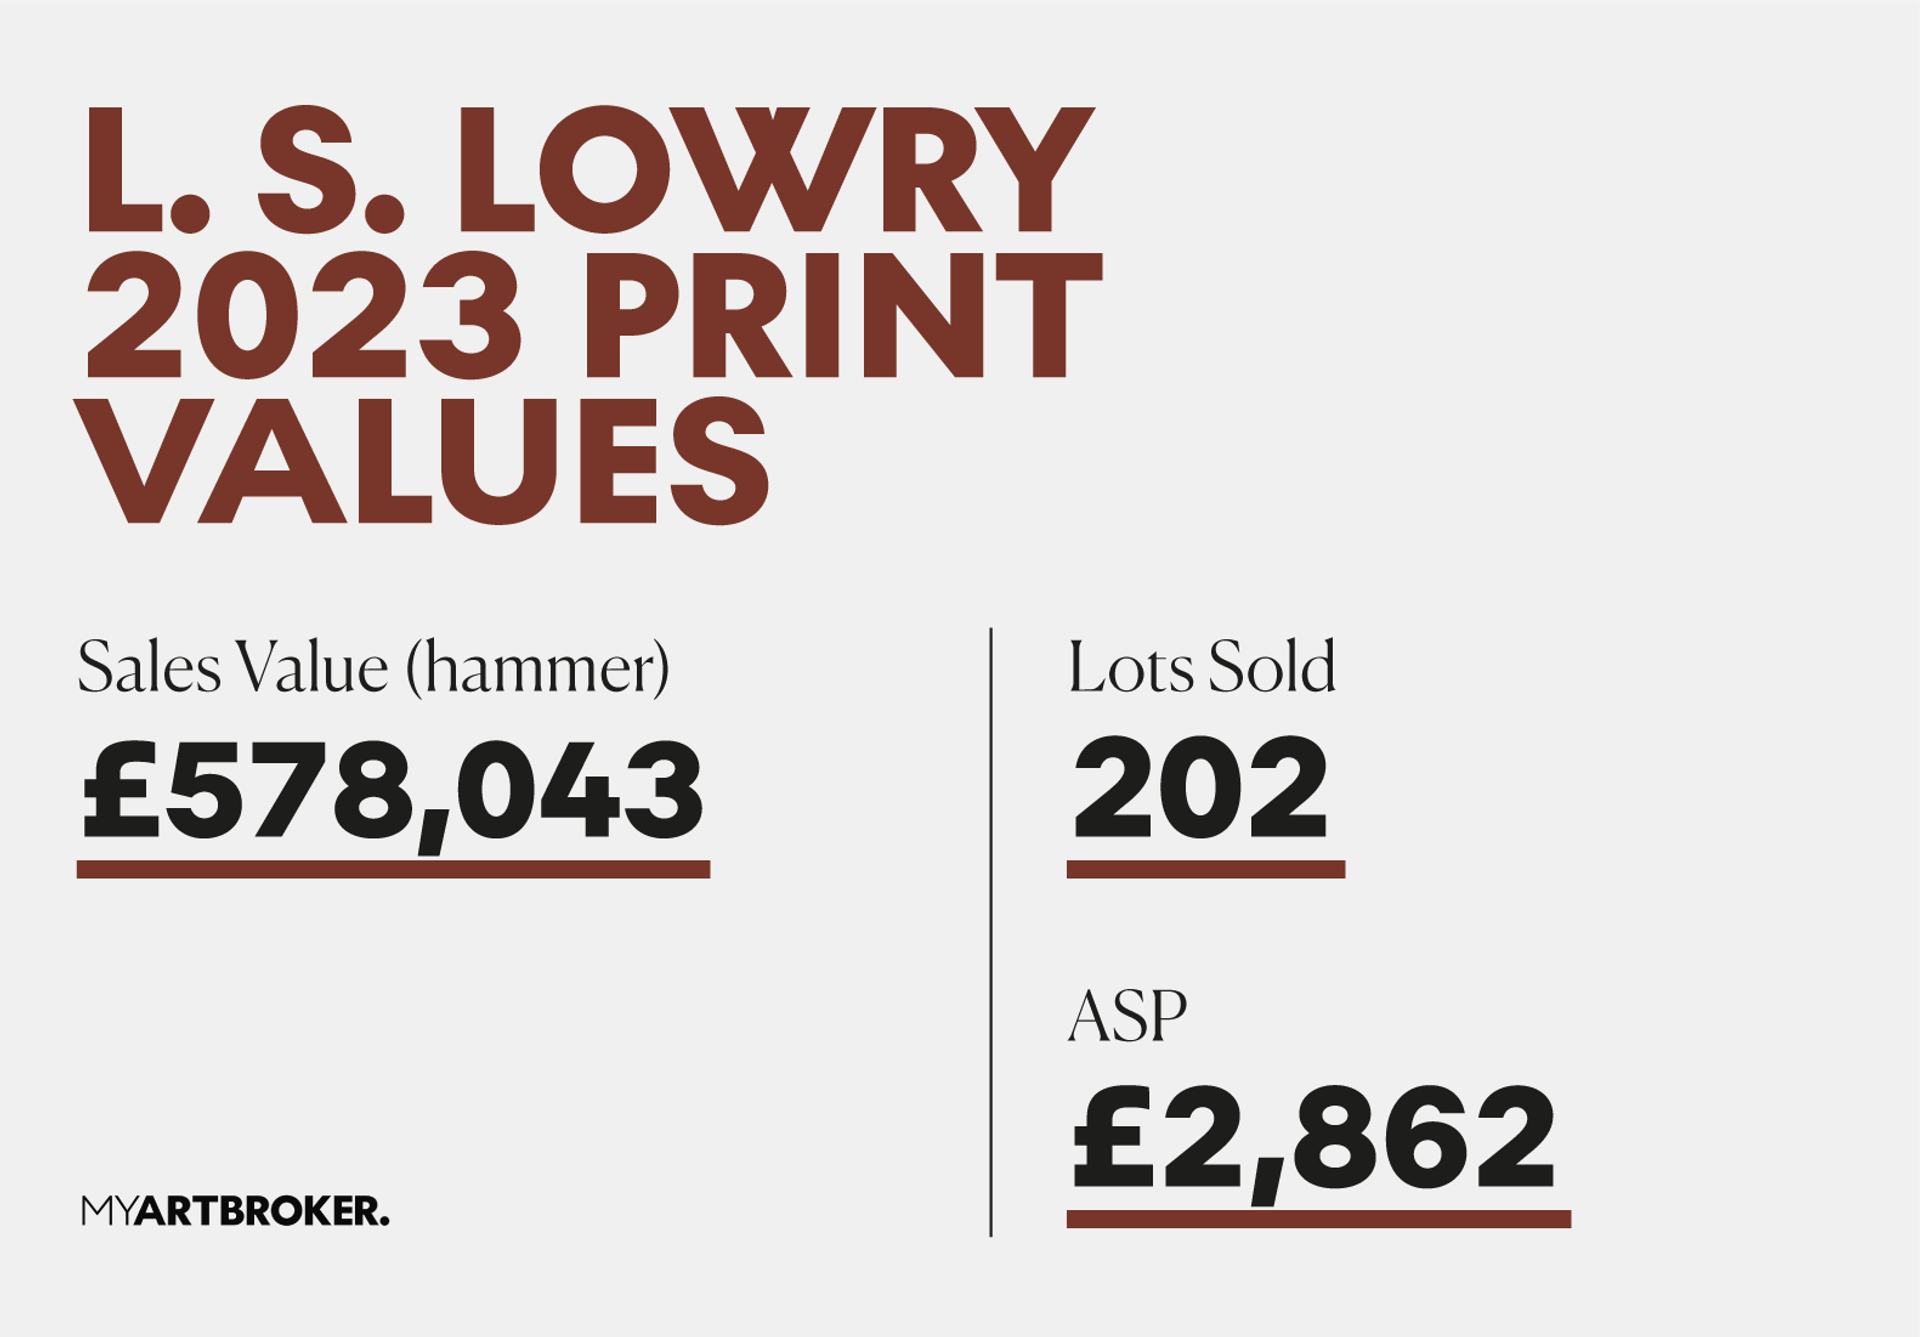 An illustrative design text showing LS Lowry's 2023 print market sales value, lots sold and average selling price. 